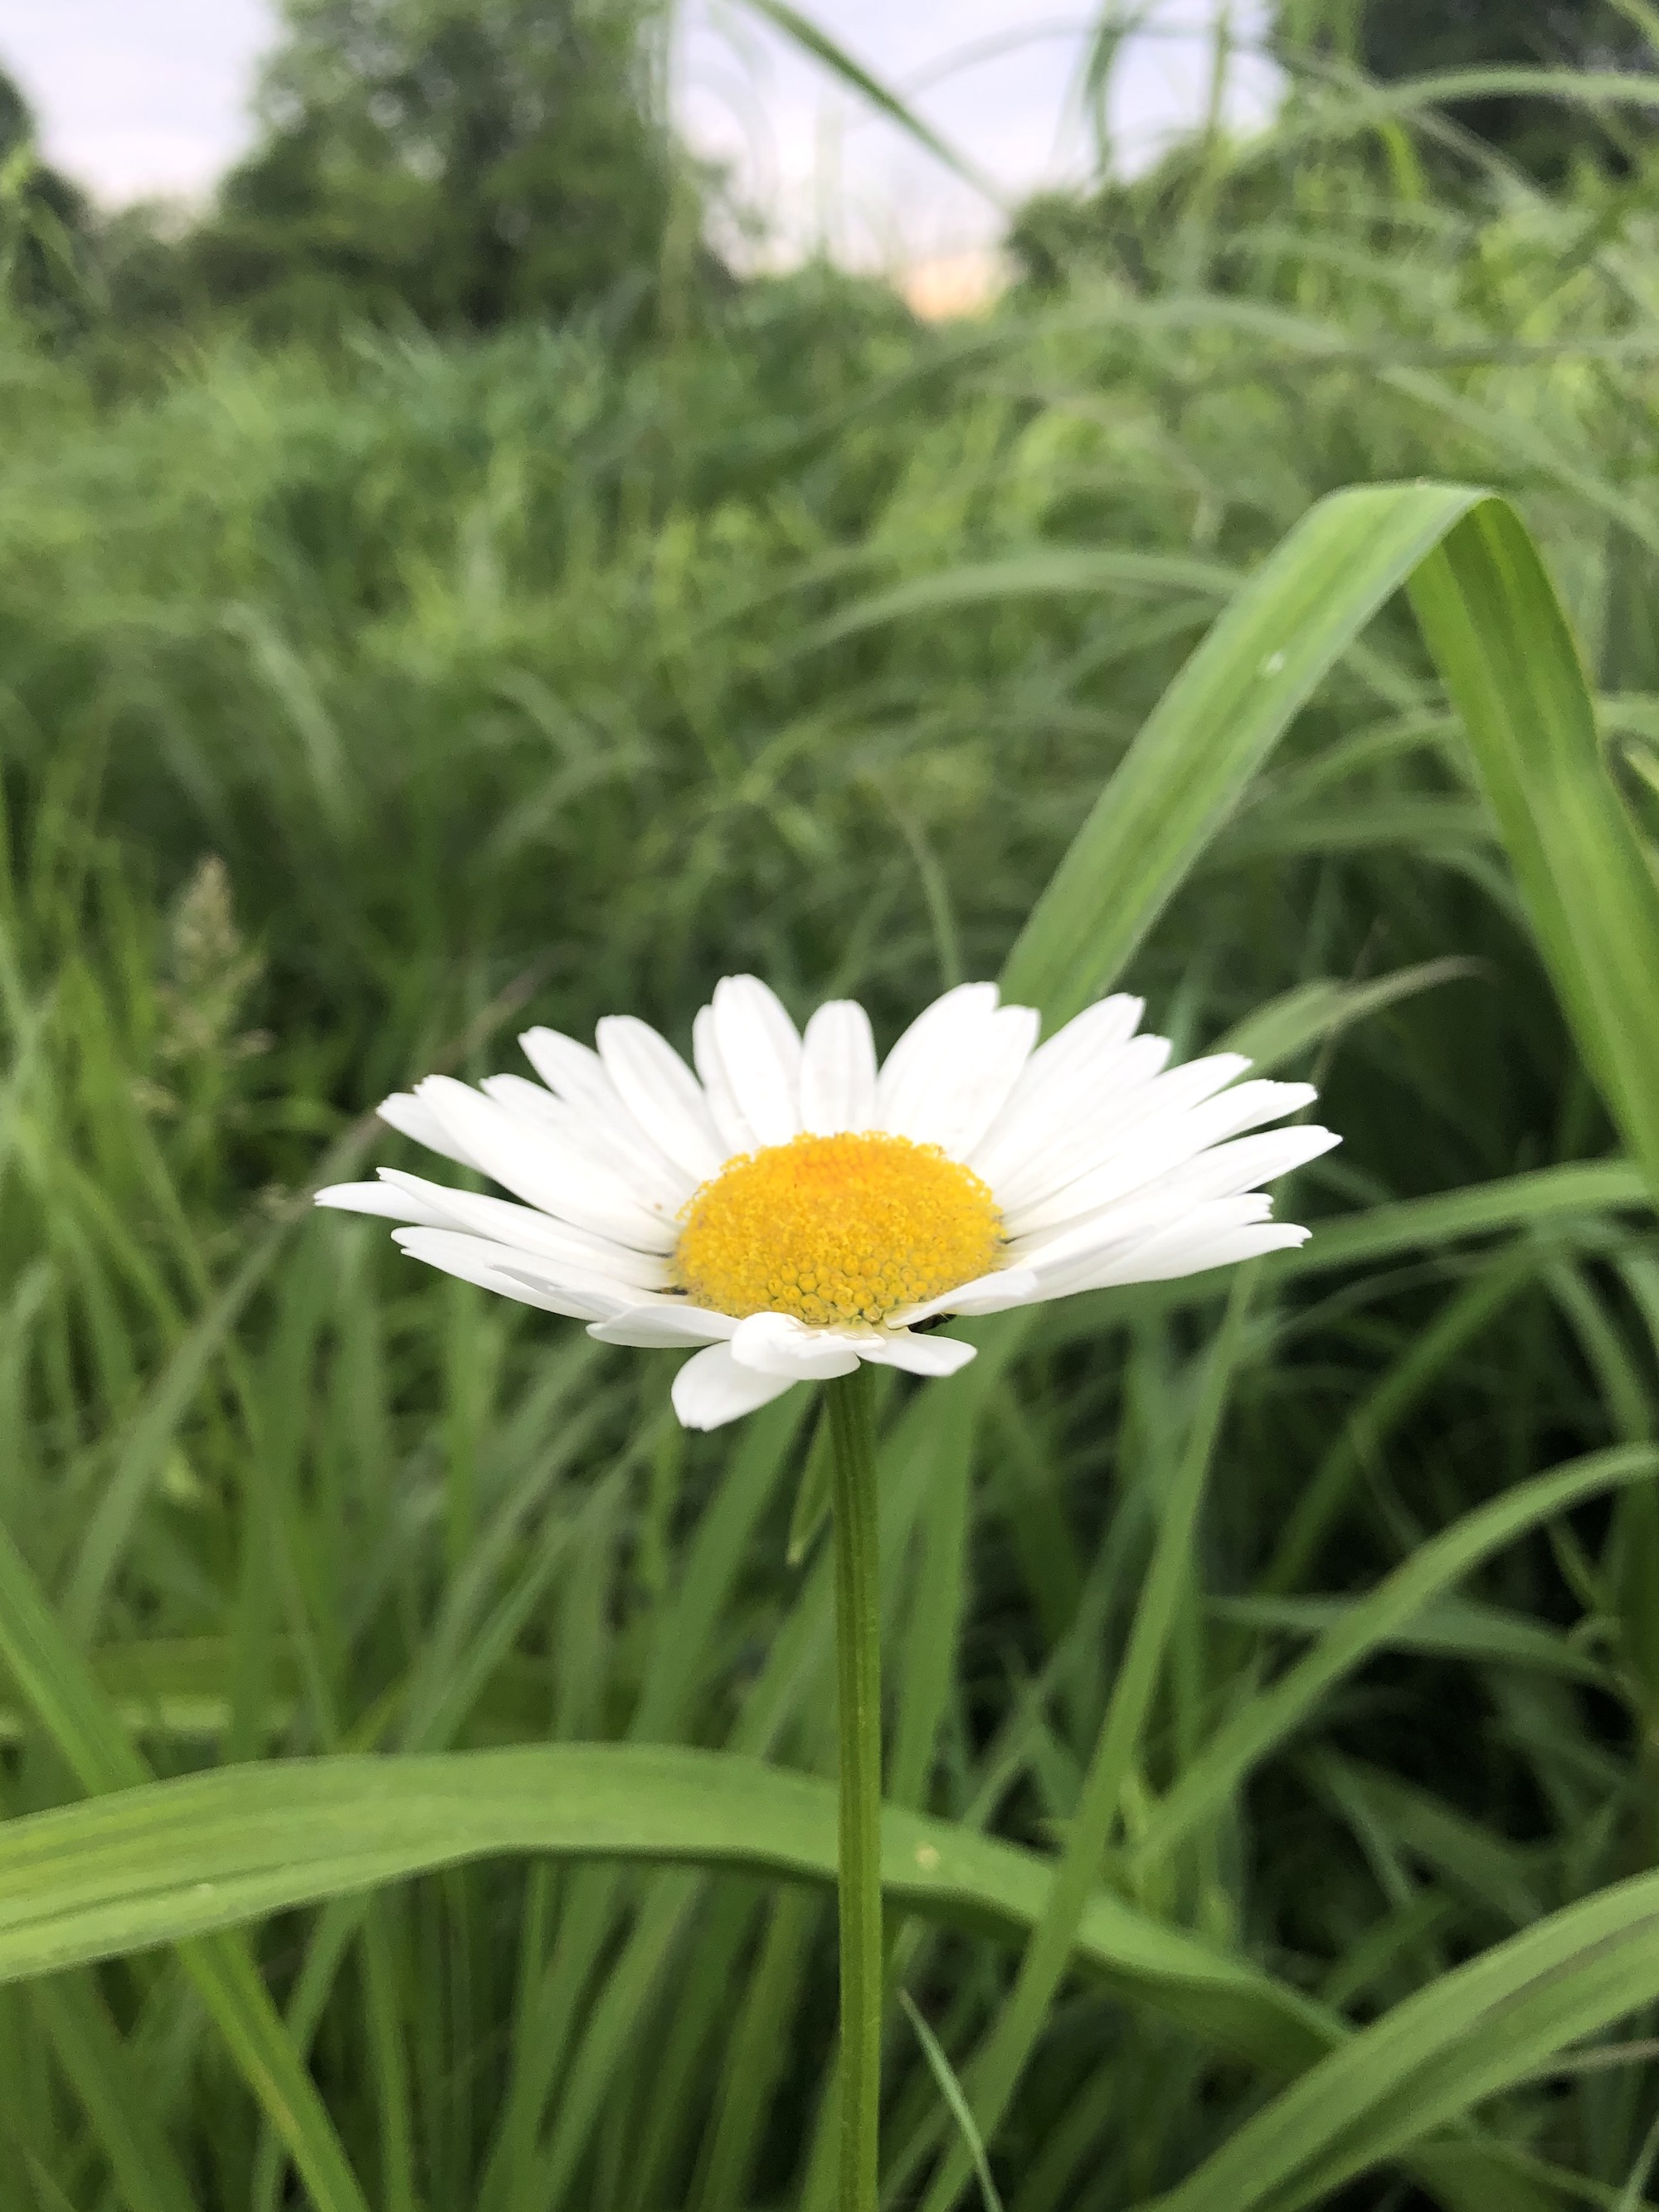 Ox-eye Daisy on bank of retaining pond in Madison, Wisconsin on June 4, 2021.